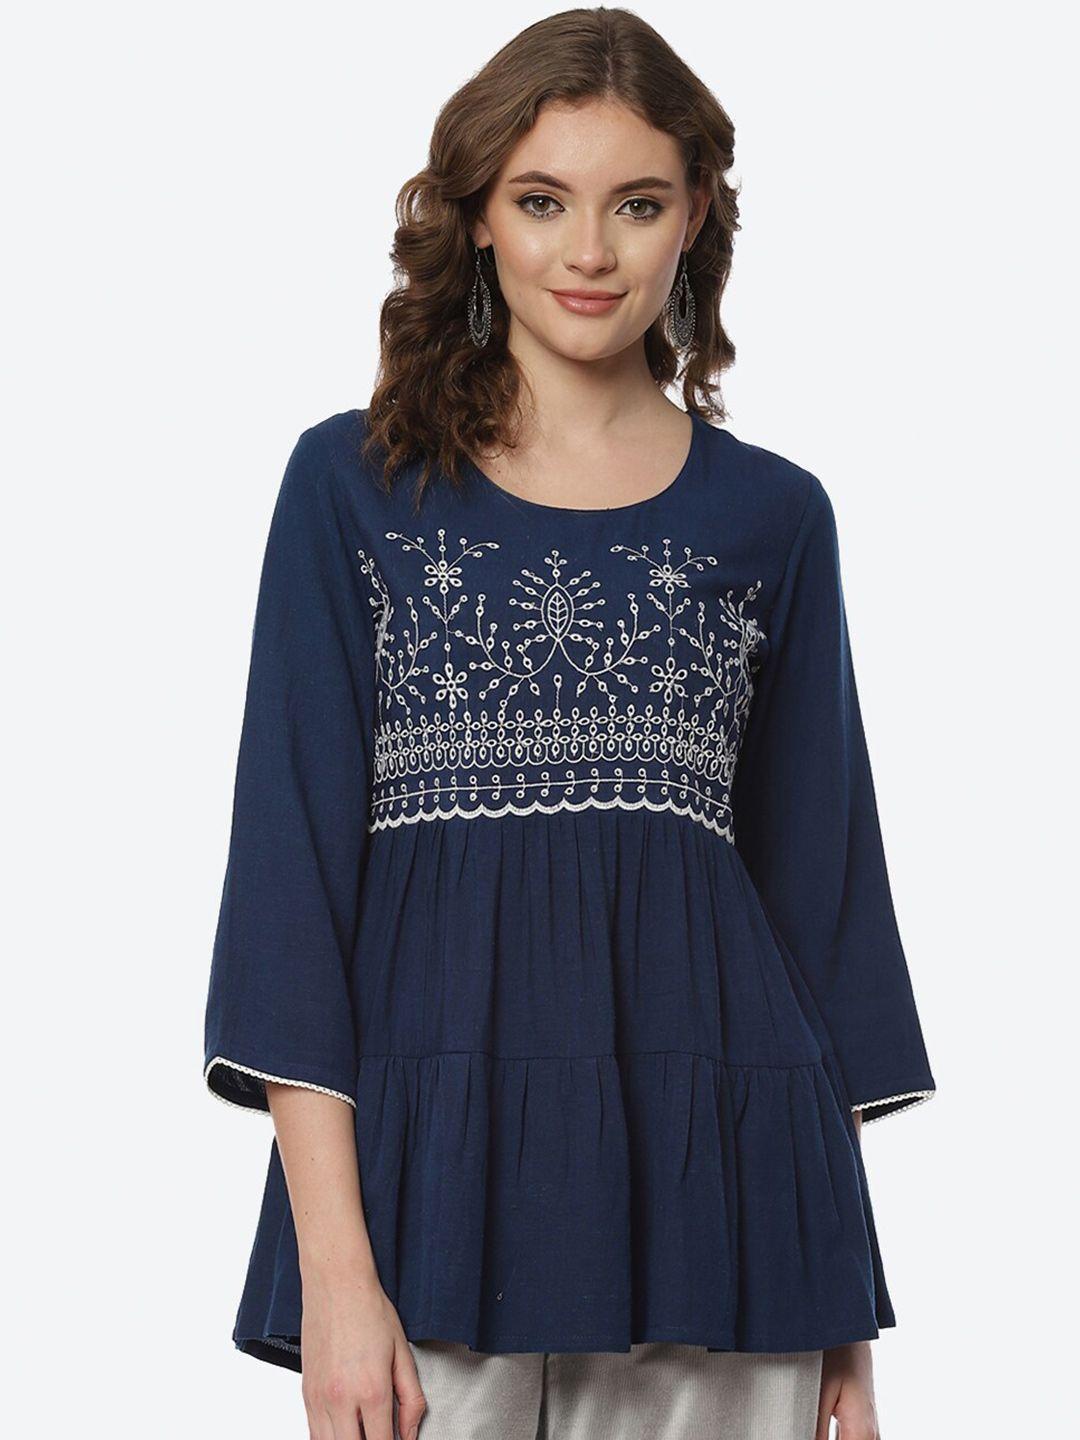 rangriti women blue embroidered tired a-line top